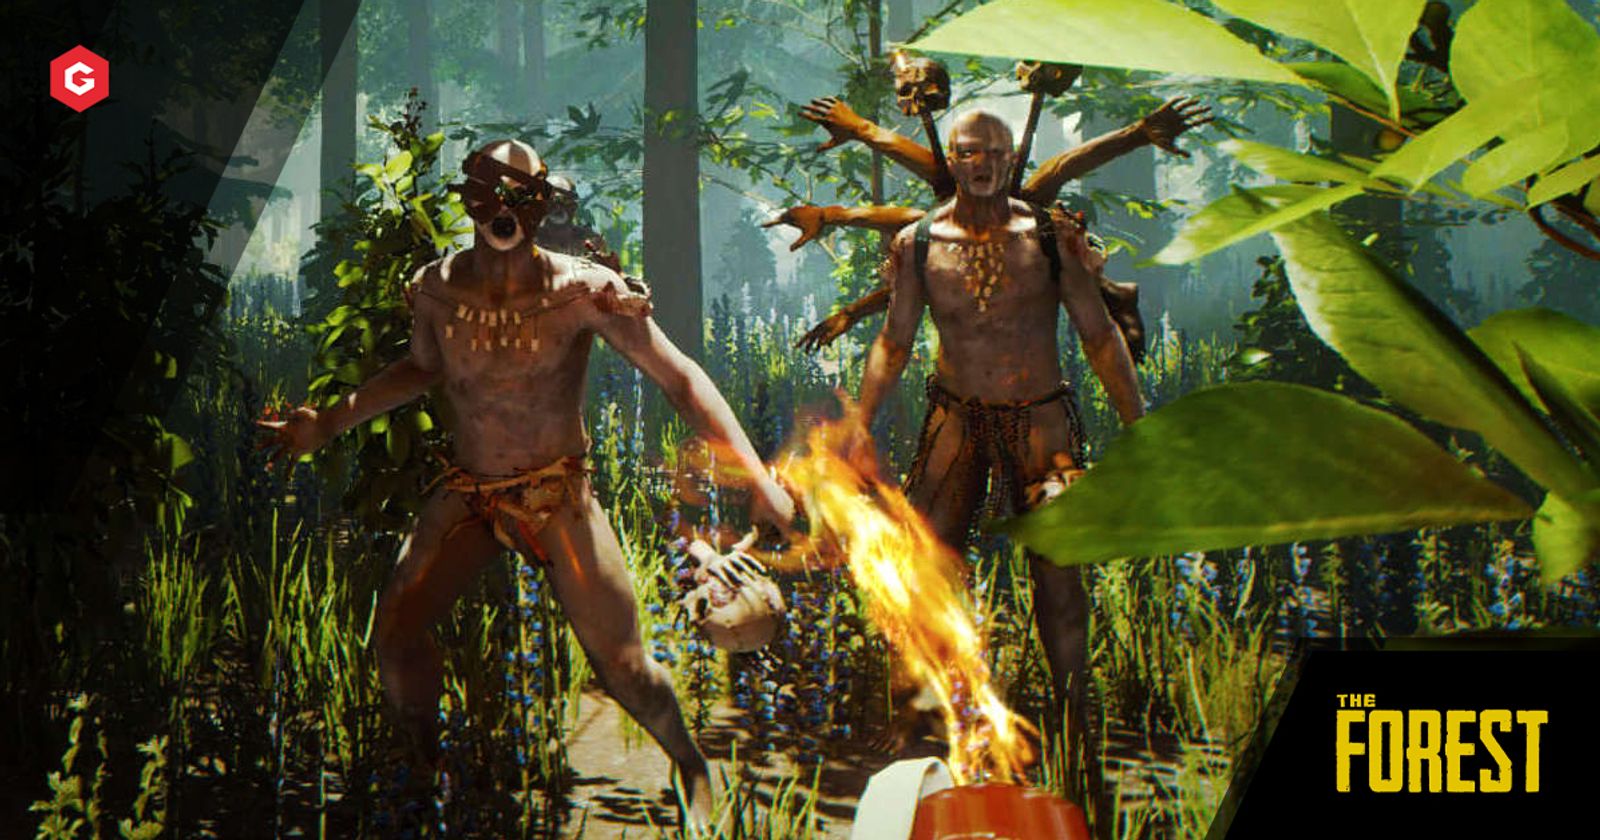 Will Sons Of The Forest Be On Xbox? 